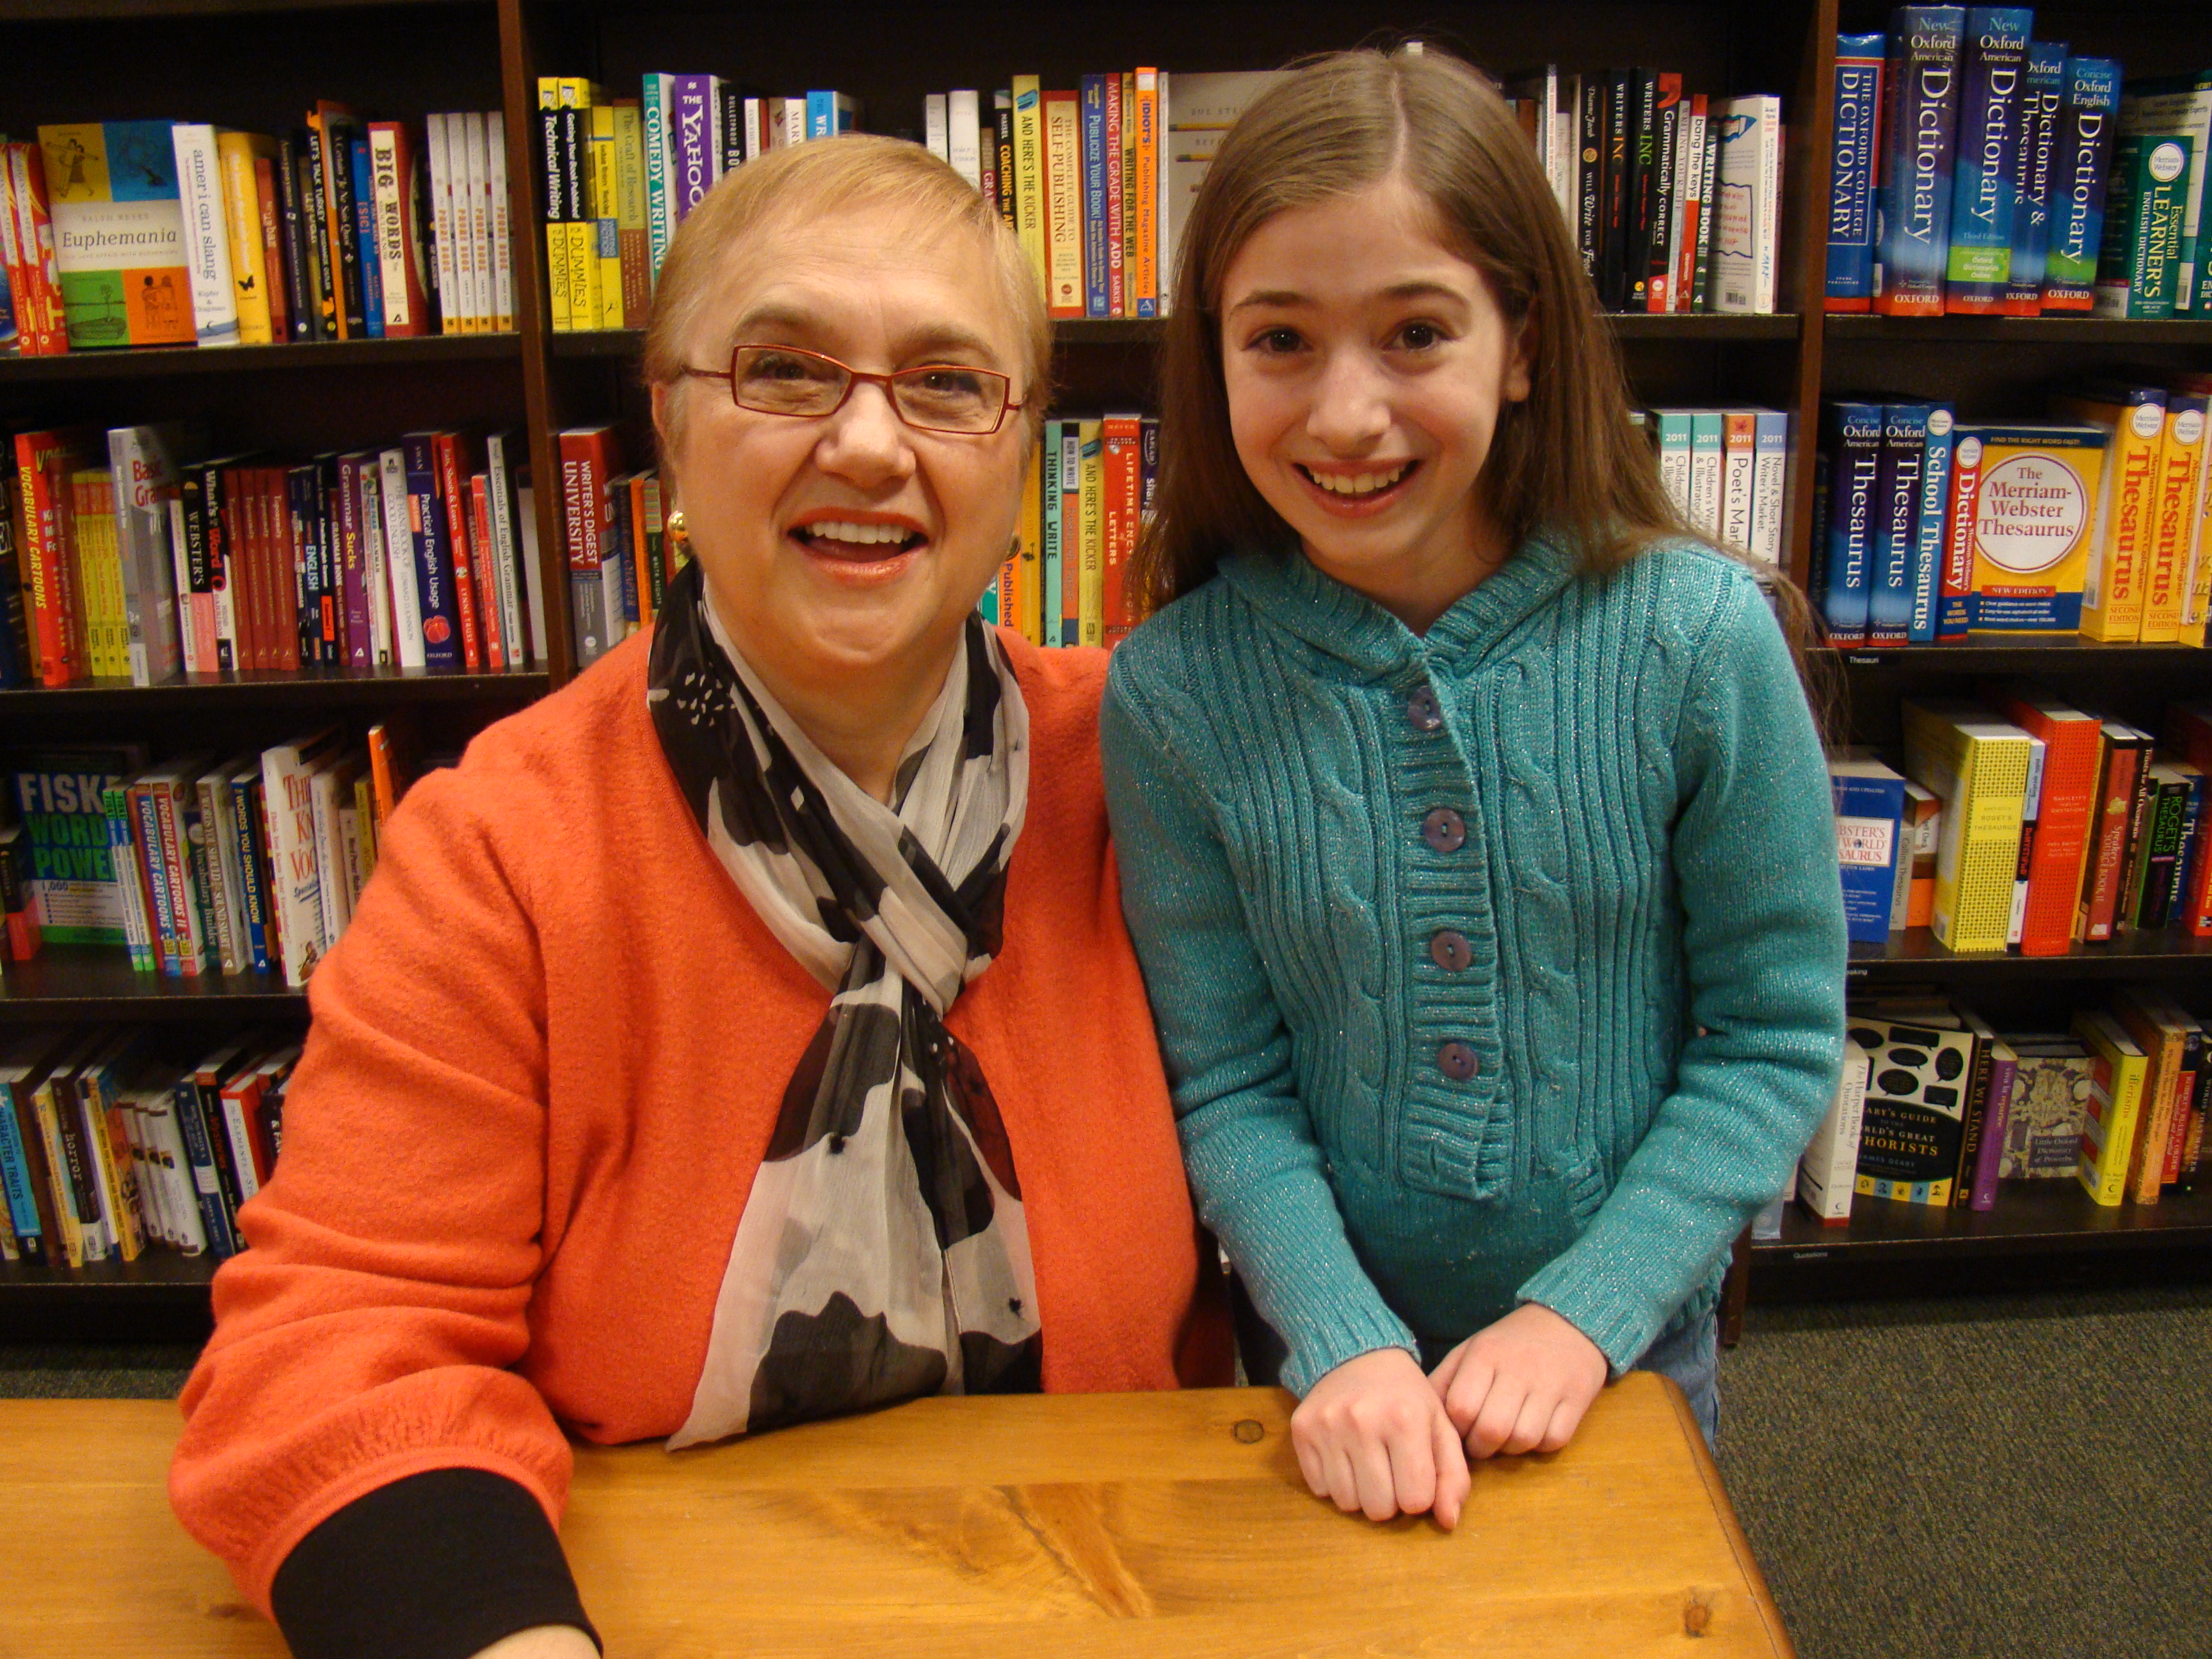 Brigid with Chef Lidia Bastianich. Brigid plays the voice of Lidia's youngest granddaughter in the PBS animated special Nonna Tell Me a Story: Lidia's Christmas Kitchen.